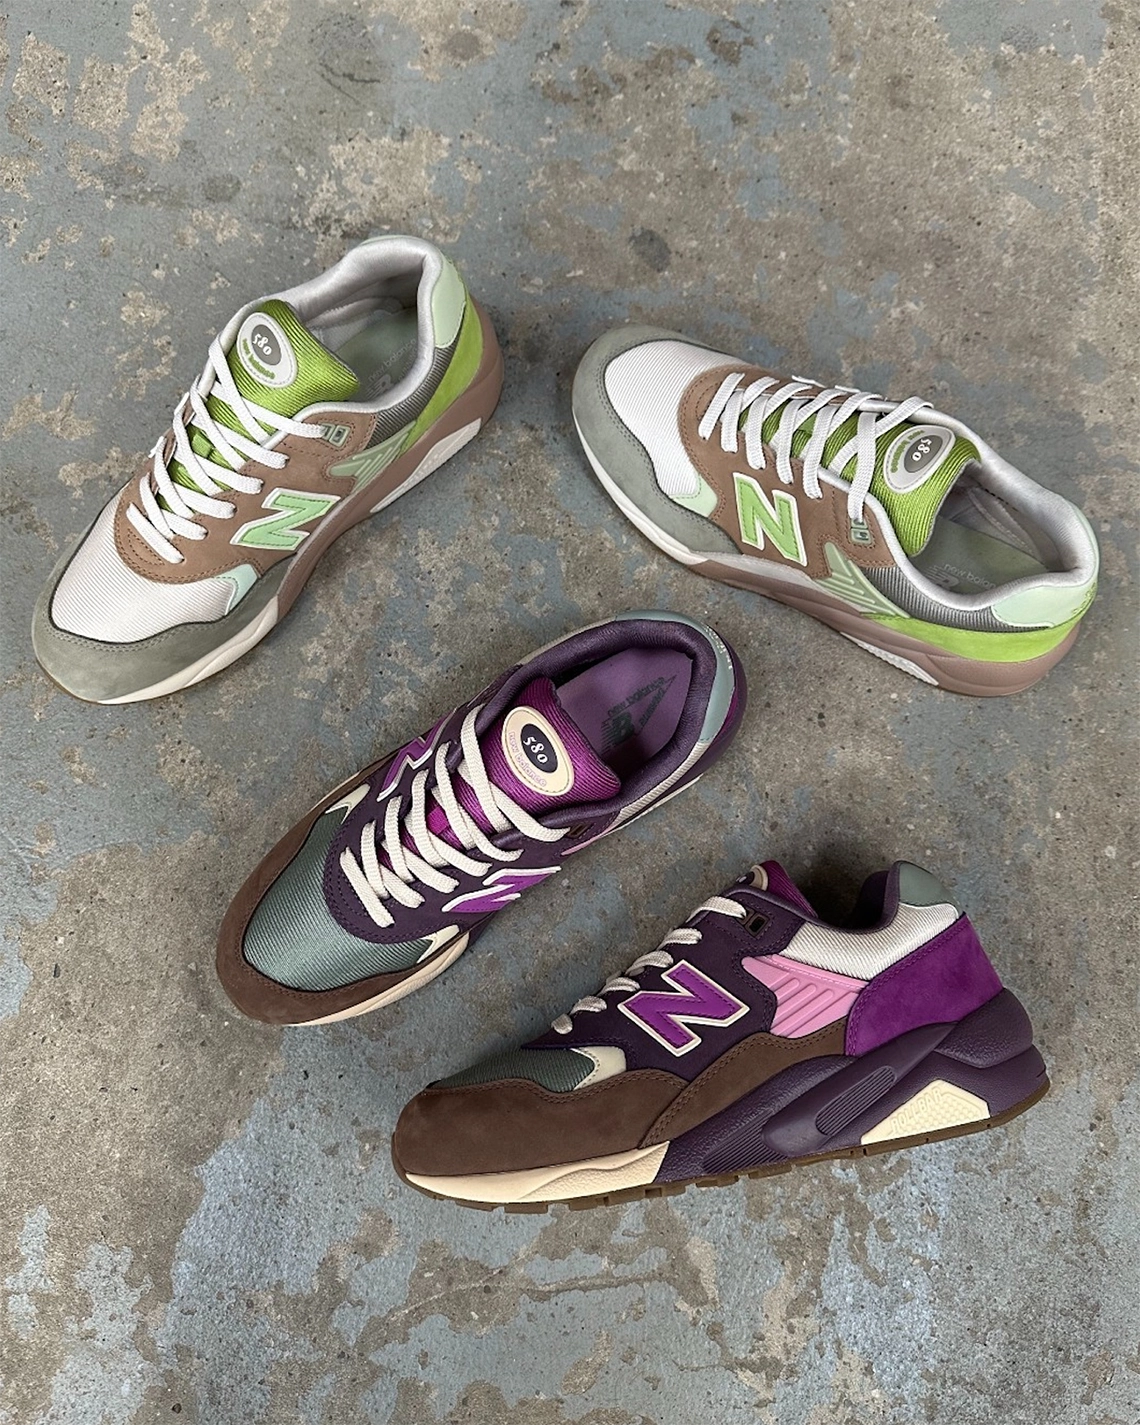 “Size? Unveils Exclusive New Balance 580 Collection”